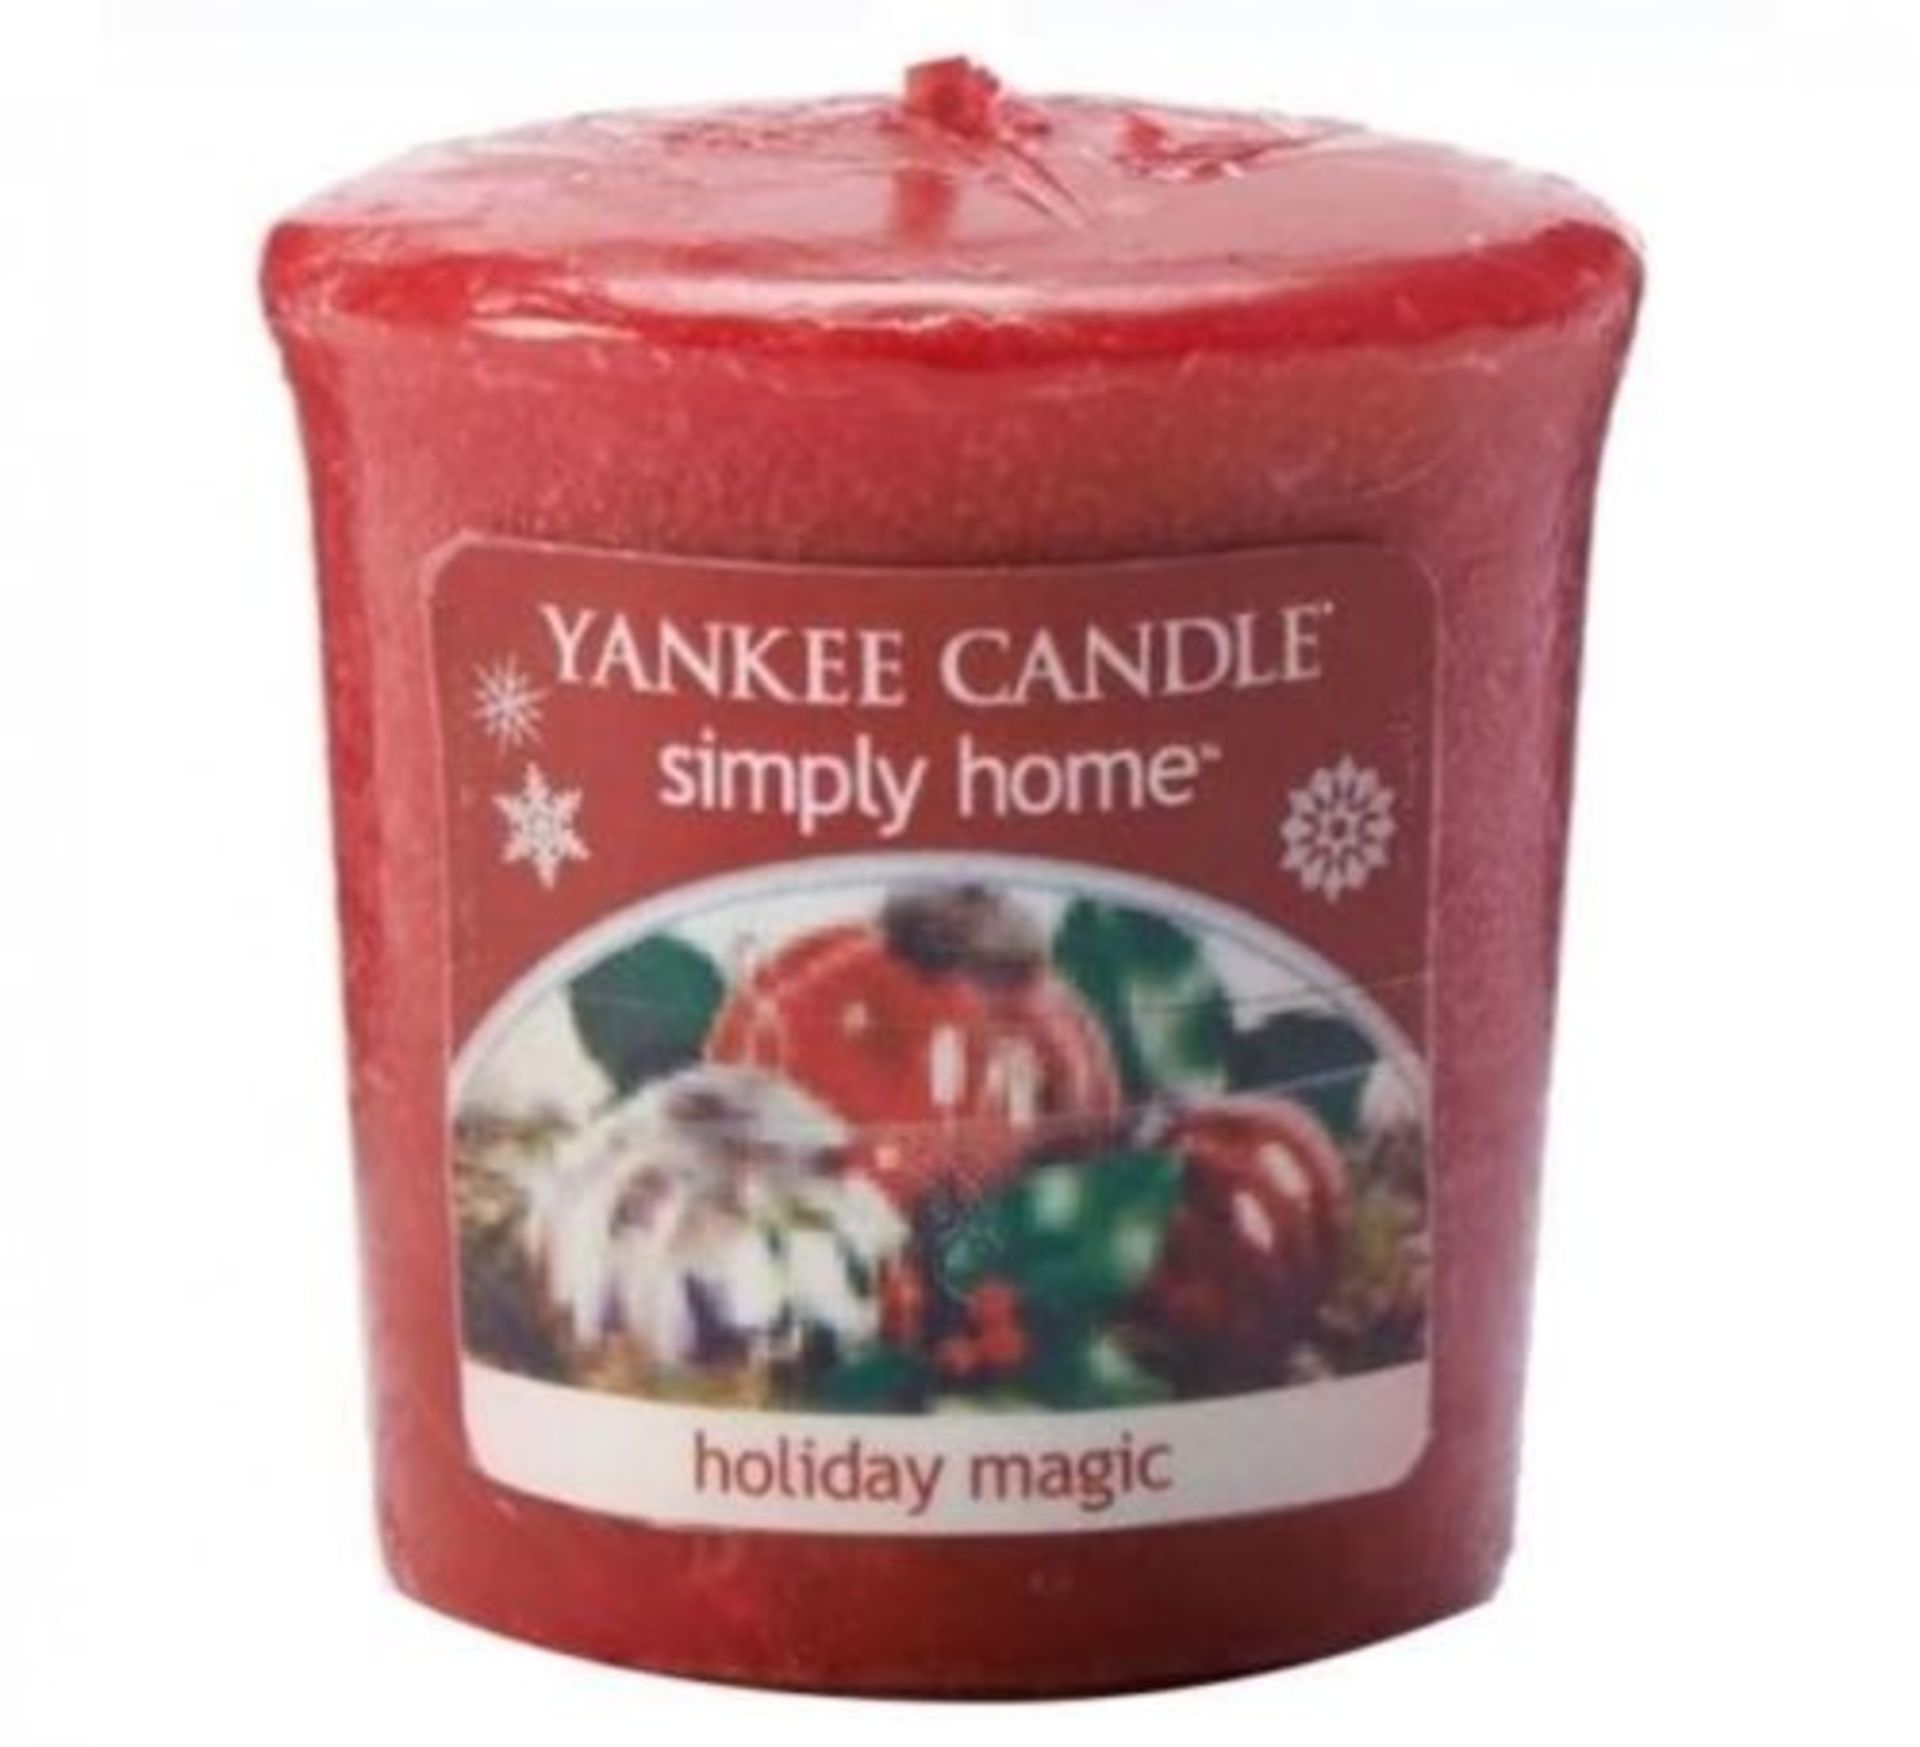 V *TRADE QTY* Brand New 18 x Yankee Candle Votive Holiday Magic 49g eBay Price £22.99 X 4 YOUR BID - Image 2 of 2